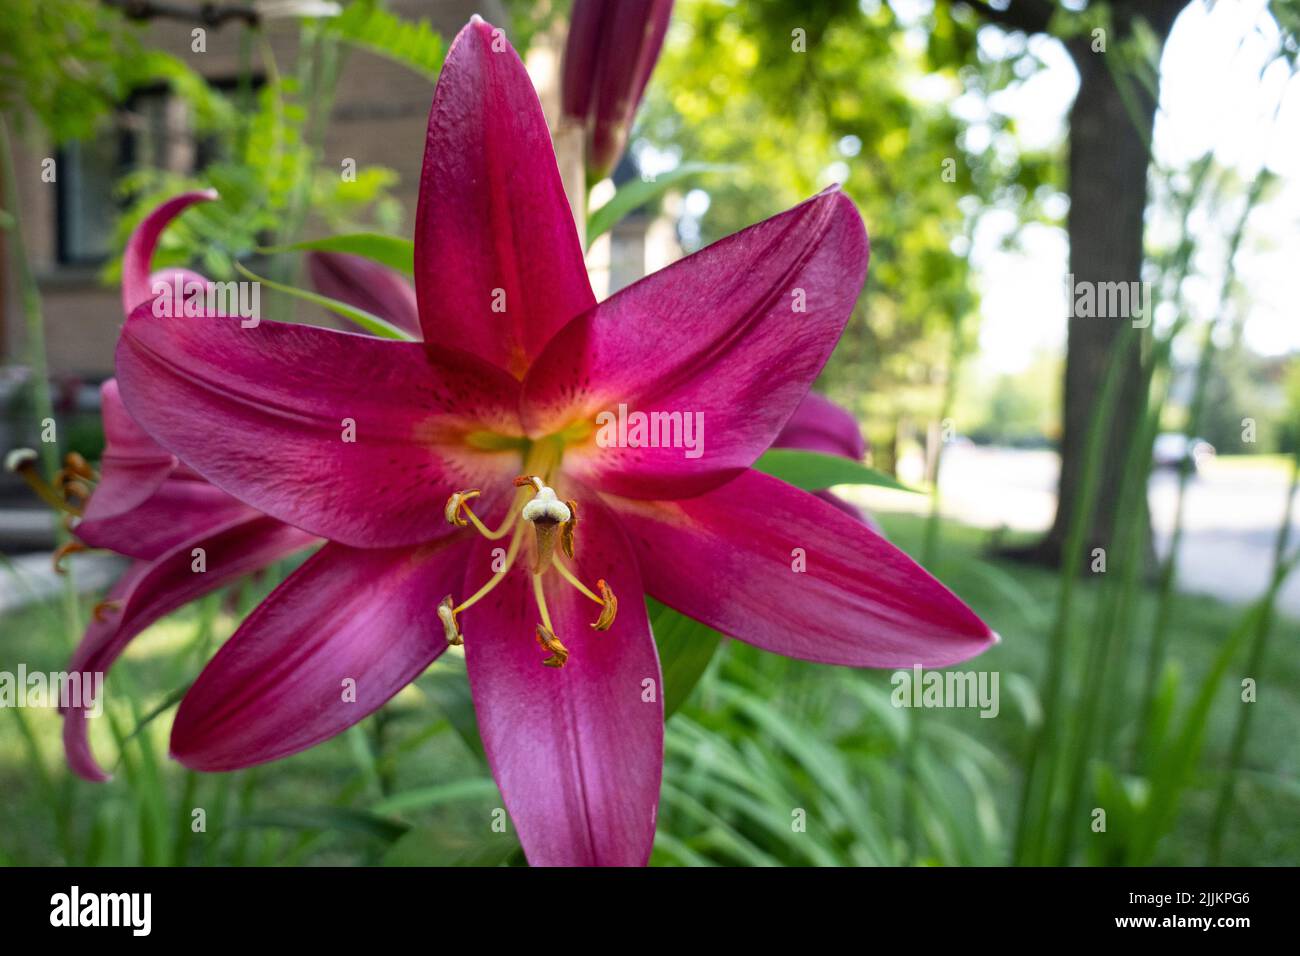 Beautiful lily pink flower in a front yard garden Stock Photo